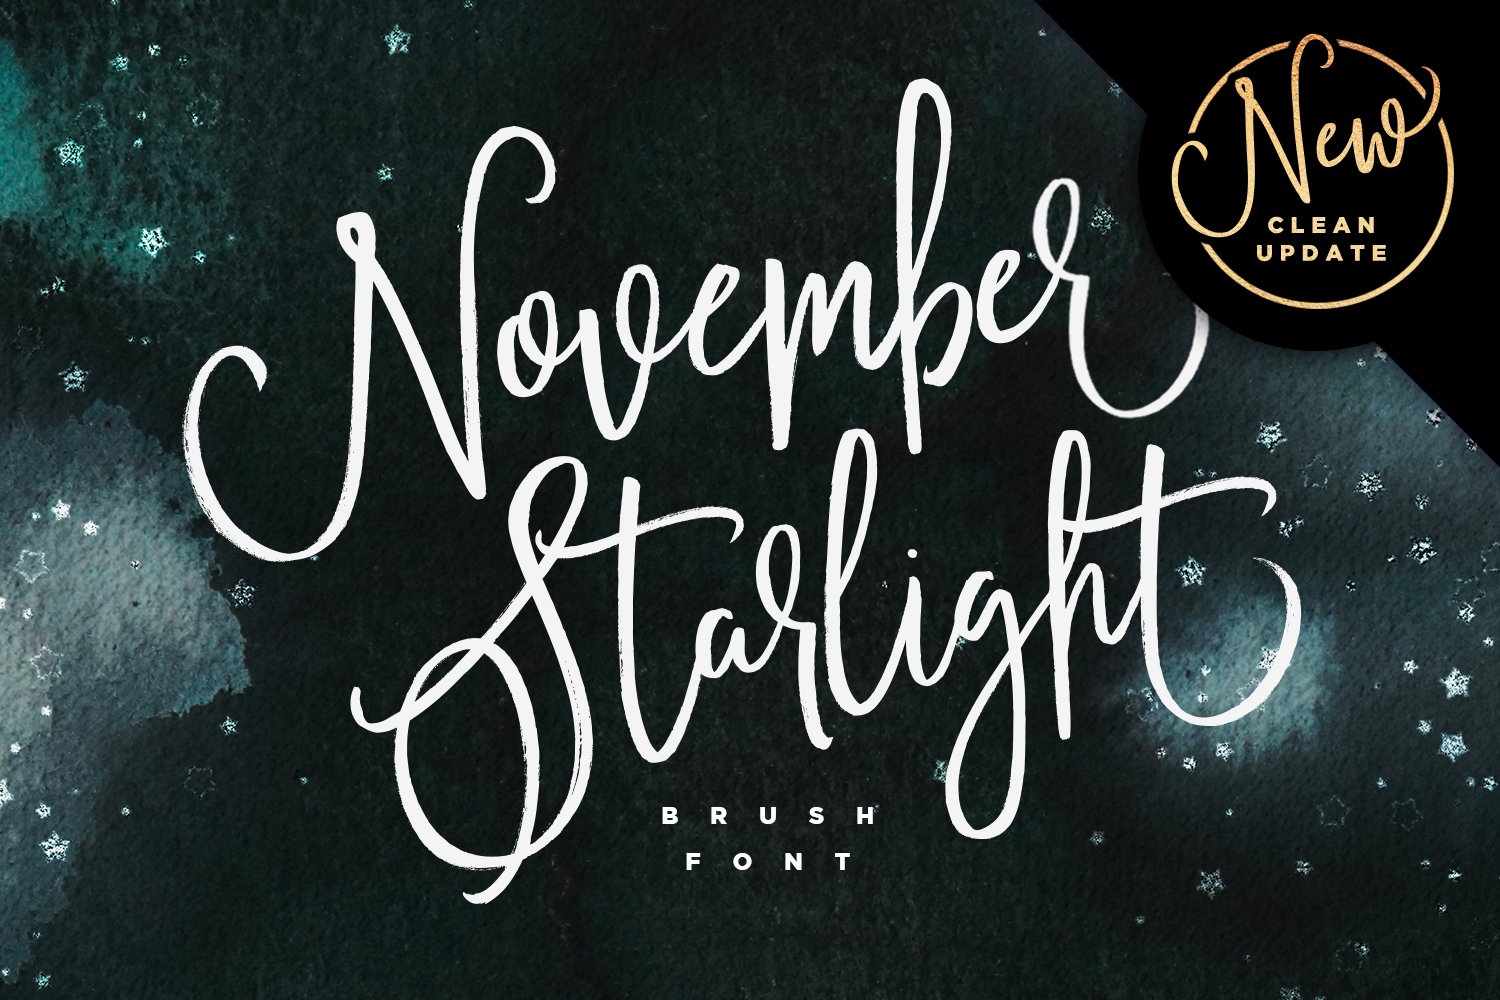 November Starlight (New Update!) preview image.